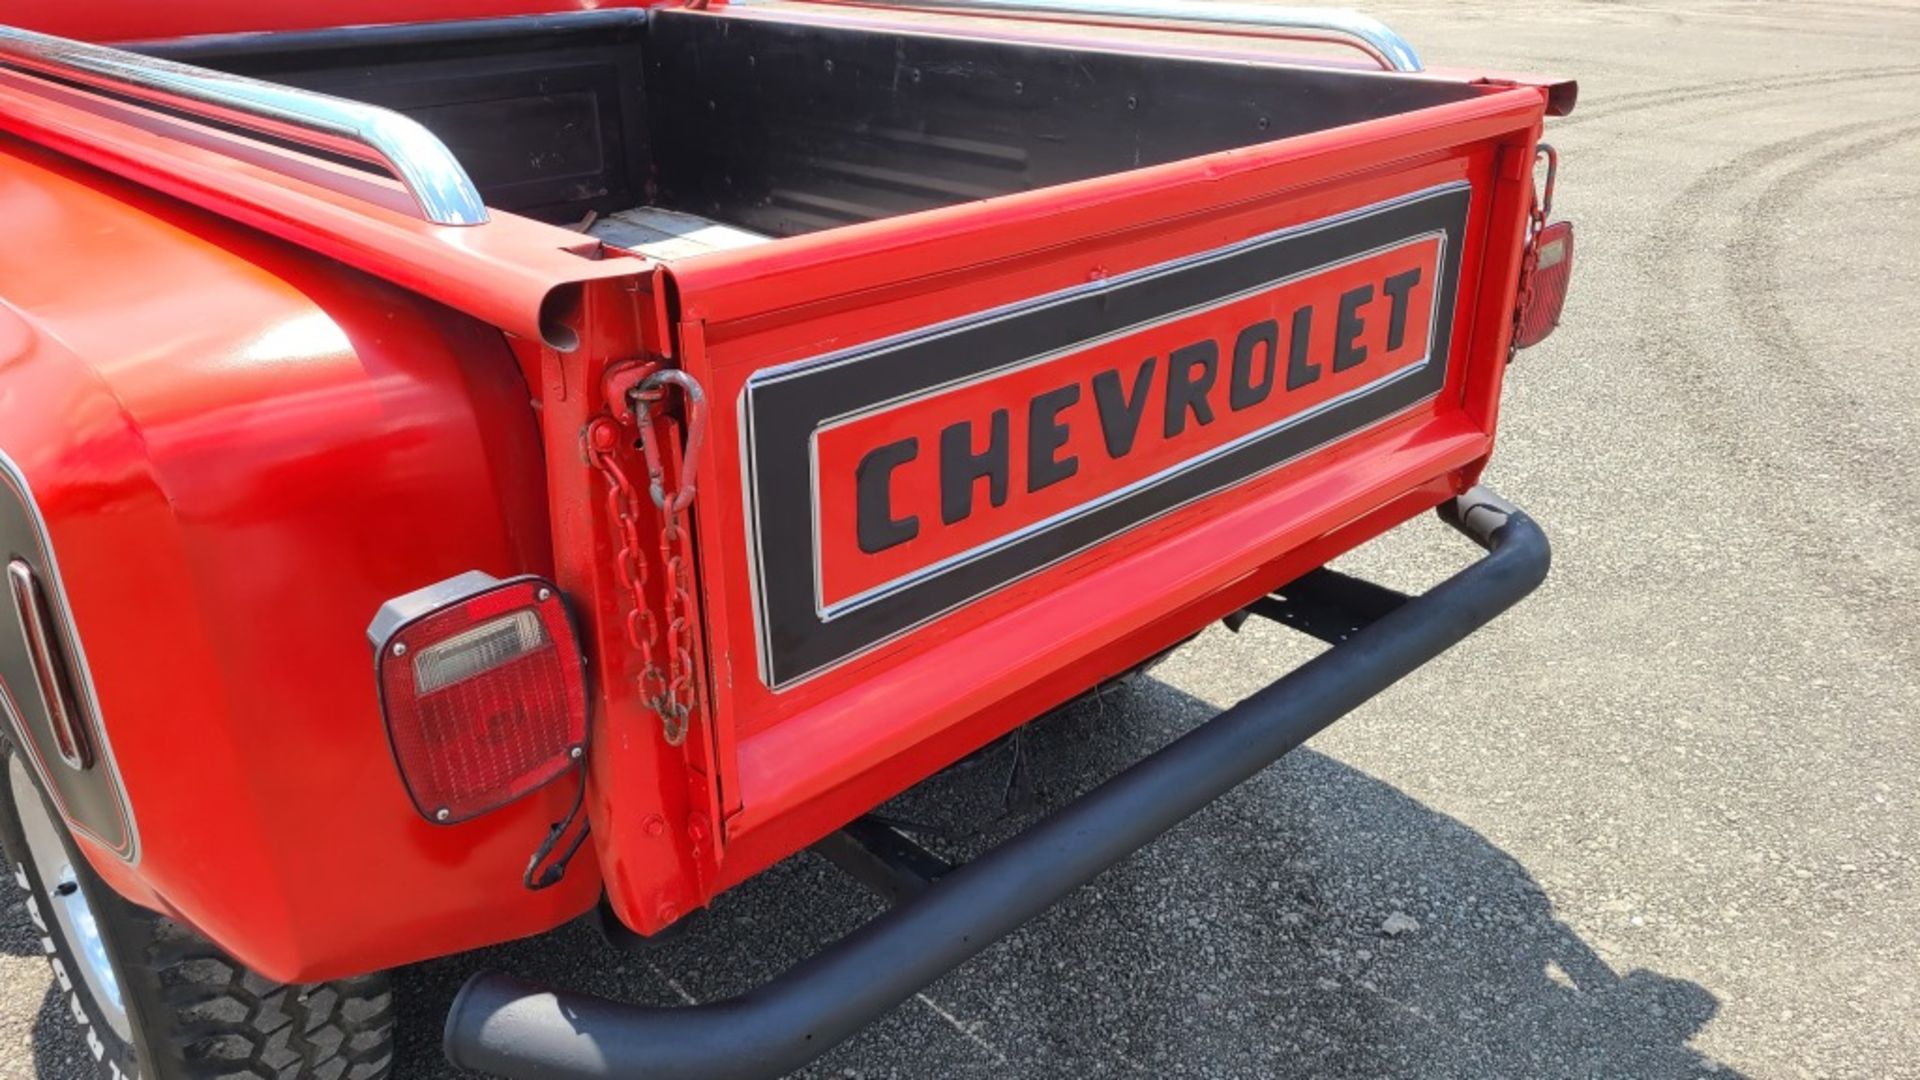 1977 Chevy K10 Pickup - Image 5 of 13